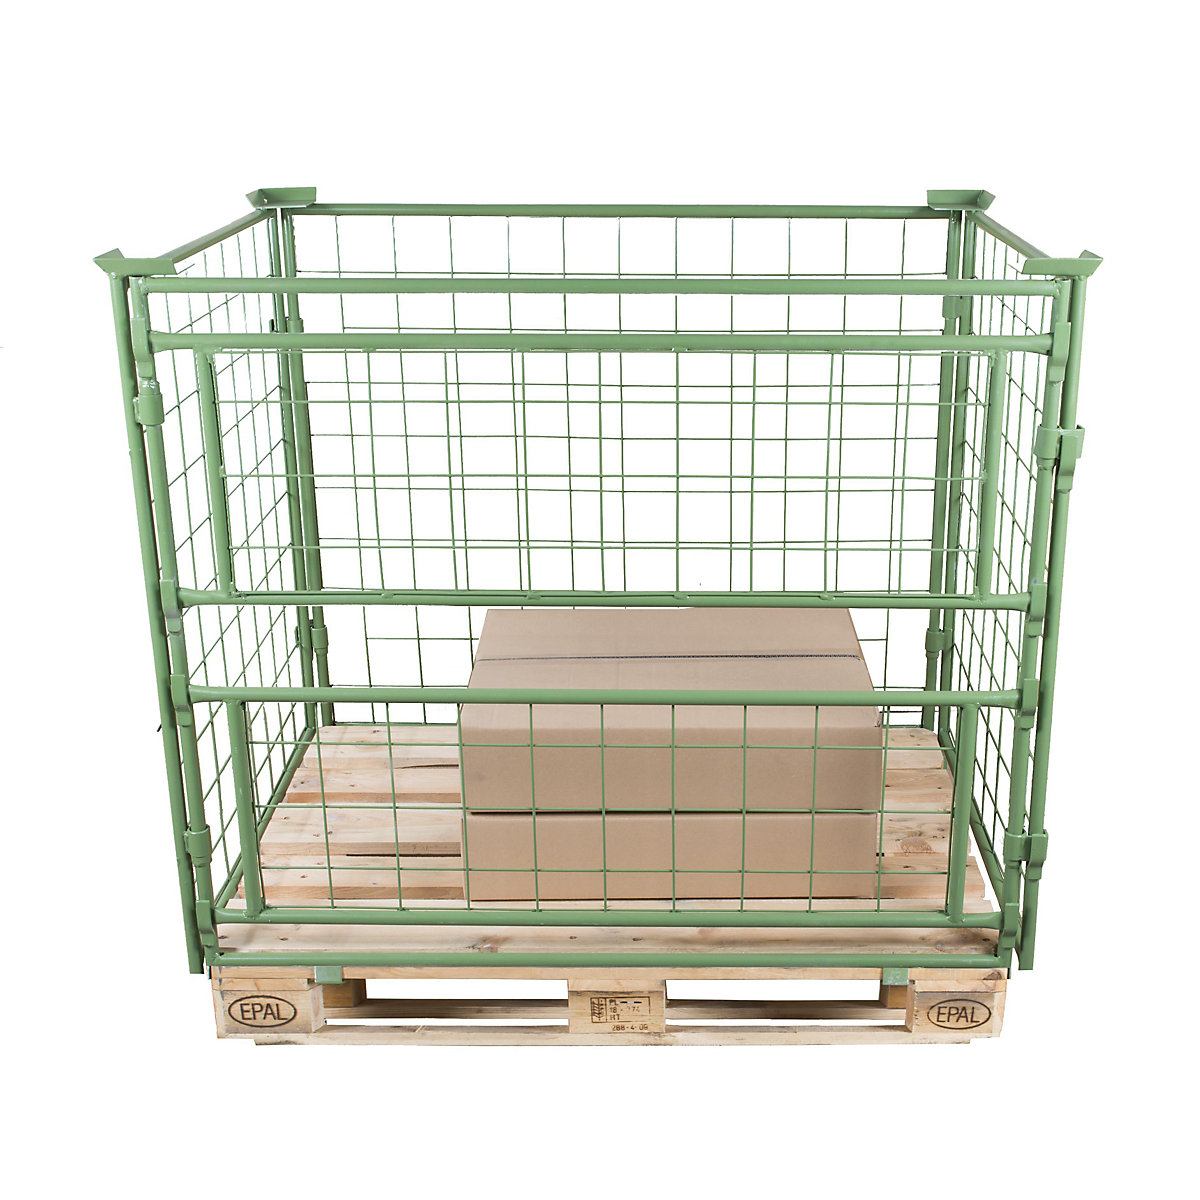 Pallet frame, effective height 1600 mm, for stacking, WxL 800 x 1200 mm, 1 long side with 2 parts, removable-1